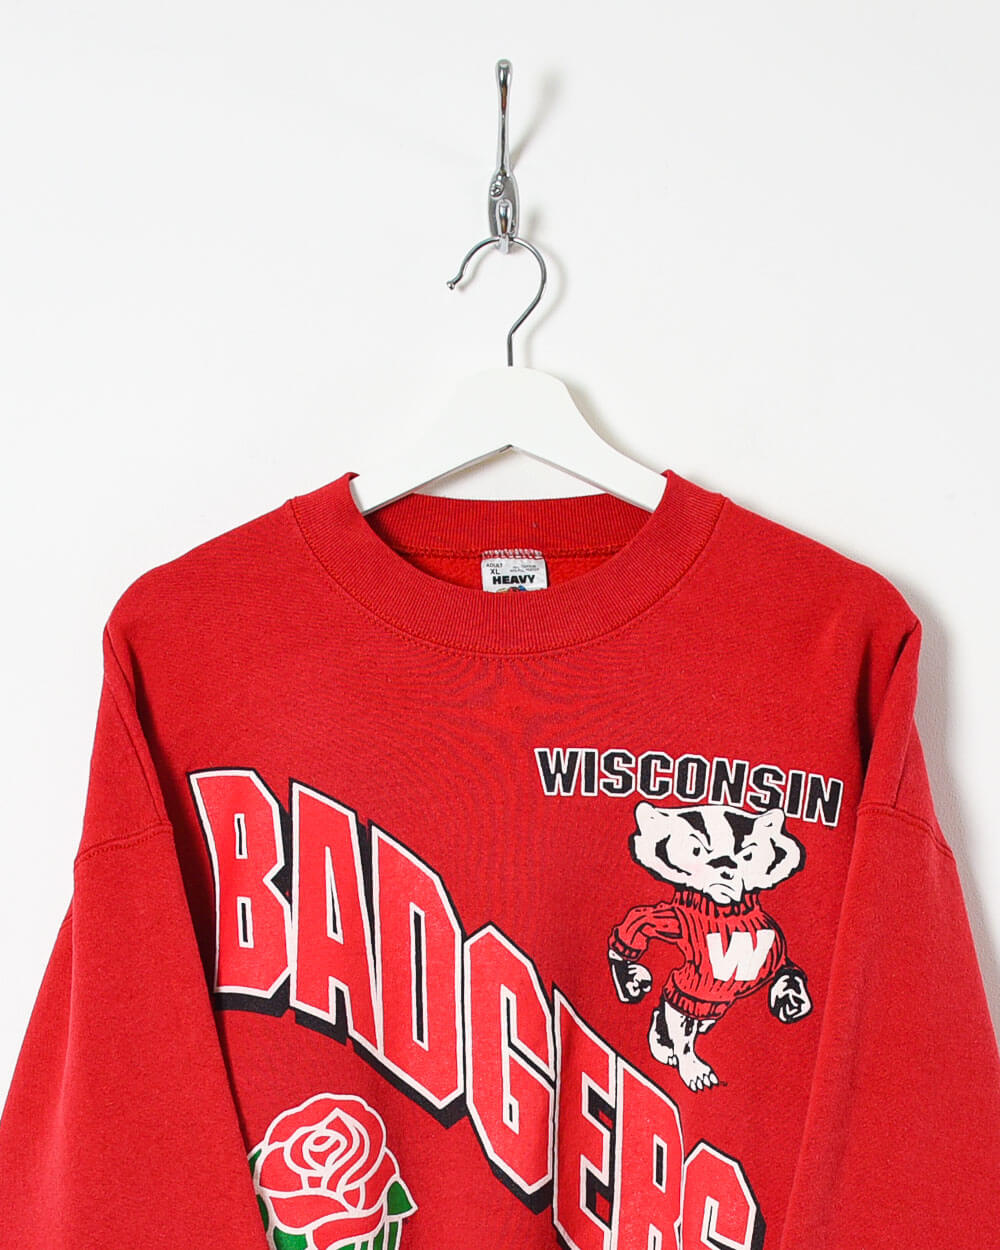 Fruit of The Loom Badgers Roswbowl Wisconsin Sweatshirt - Large - Domno Vintage 90s, 80s, 00s Retro and Vintage Clothing 